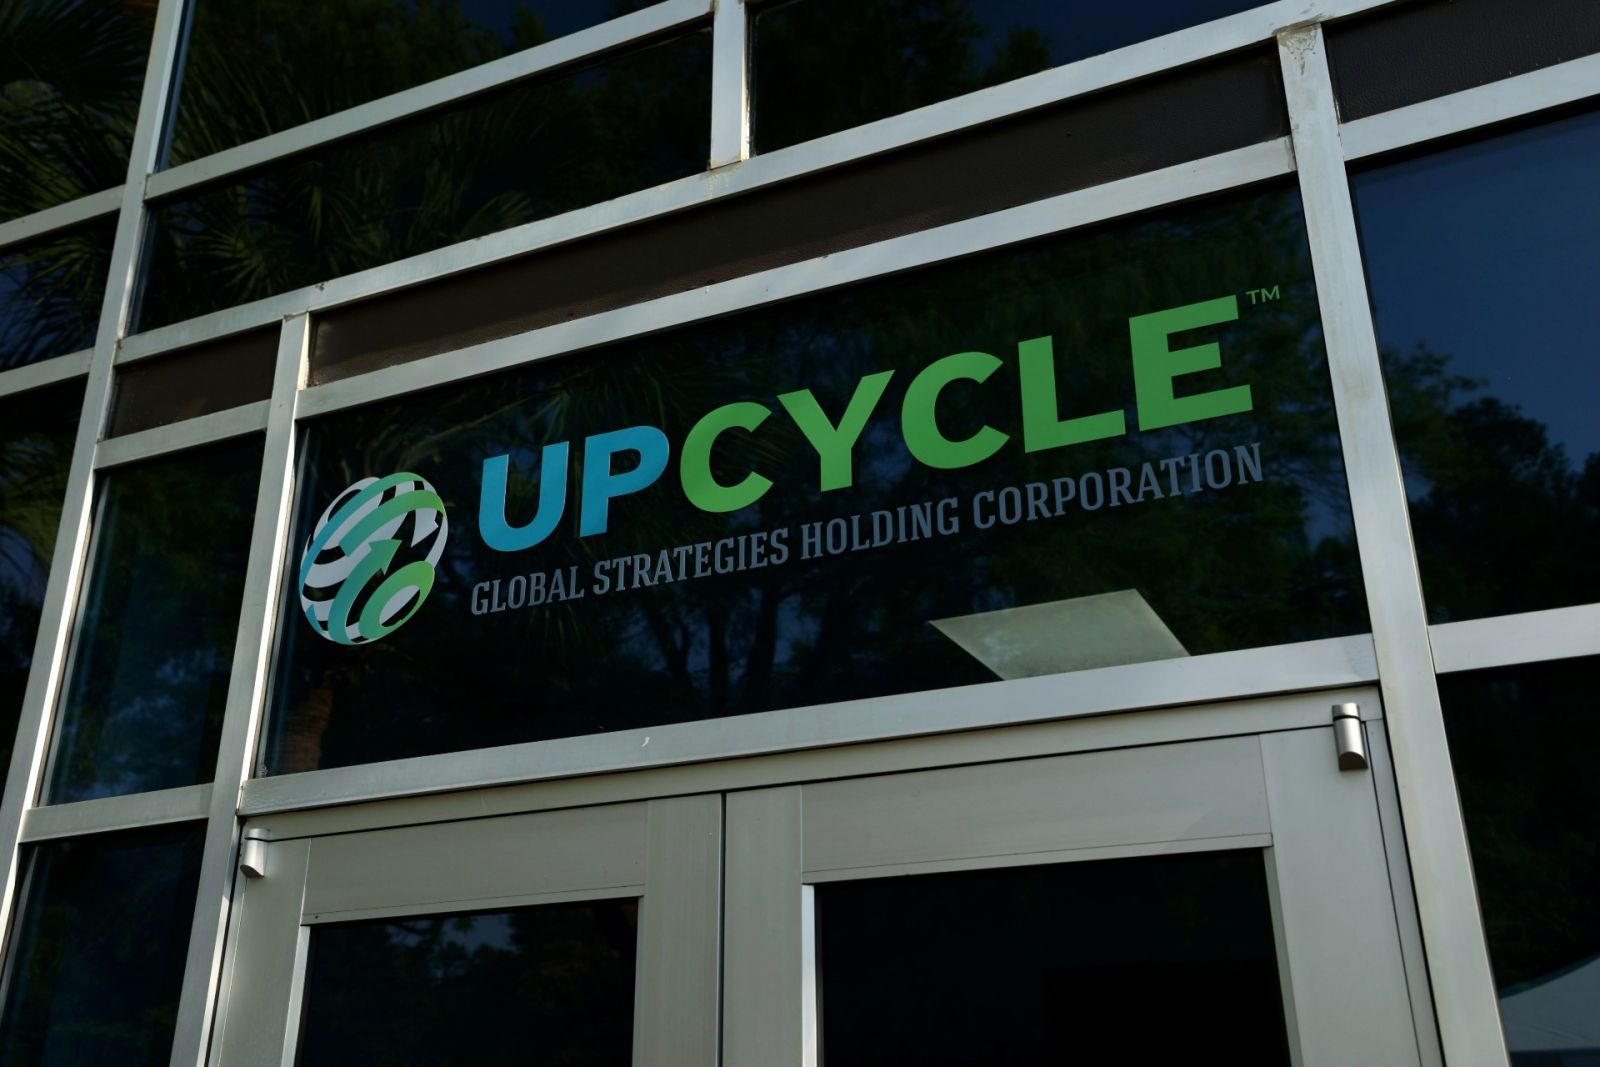 A company dedicated to making bags and other products from recycled plastics opened its new Upcycle sustainable manufacturing facility in Chapin on Thursday. (Photo/Provided)